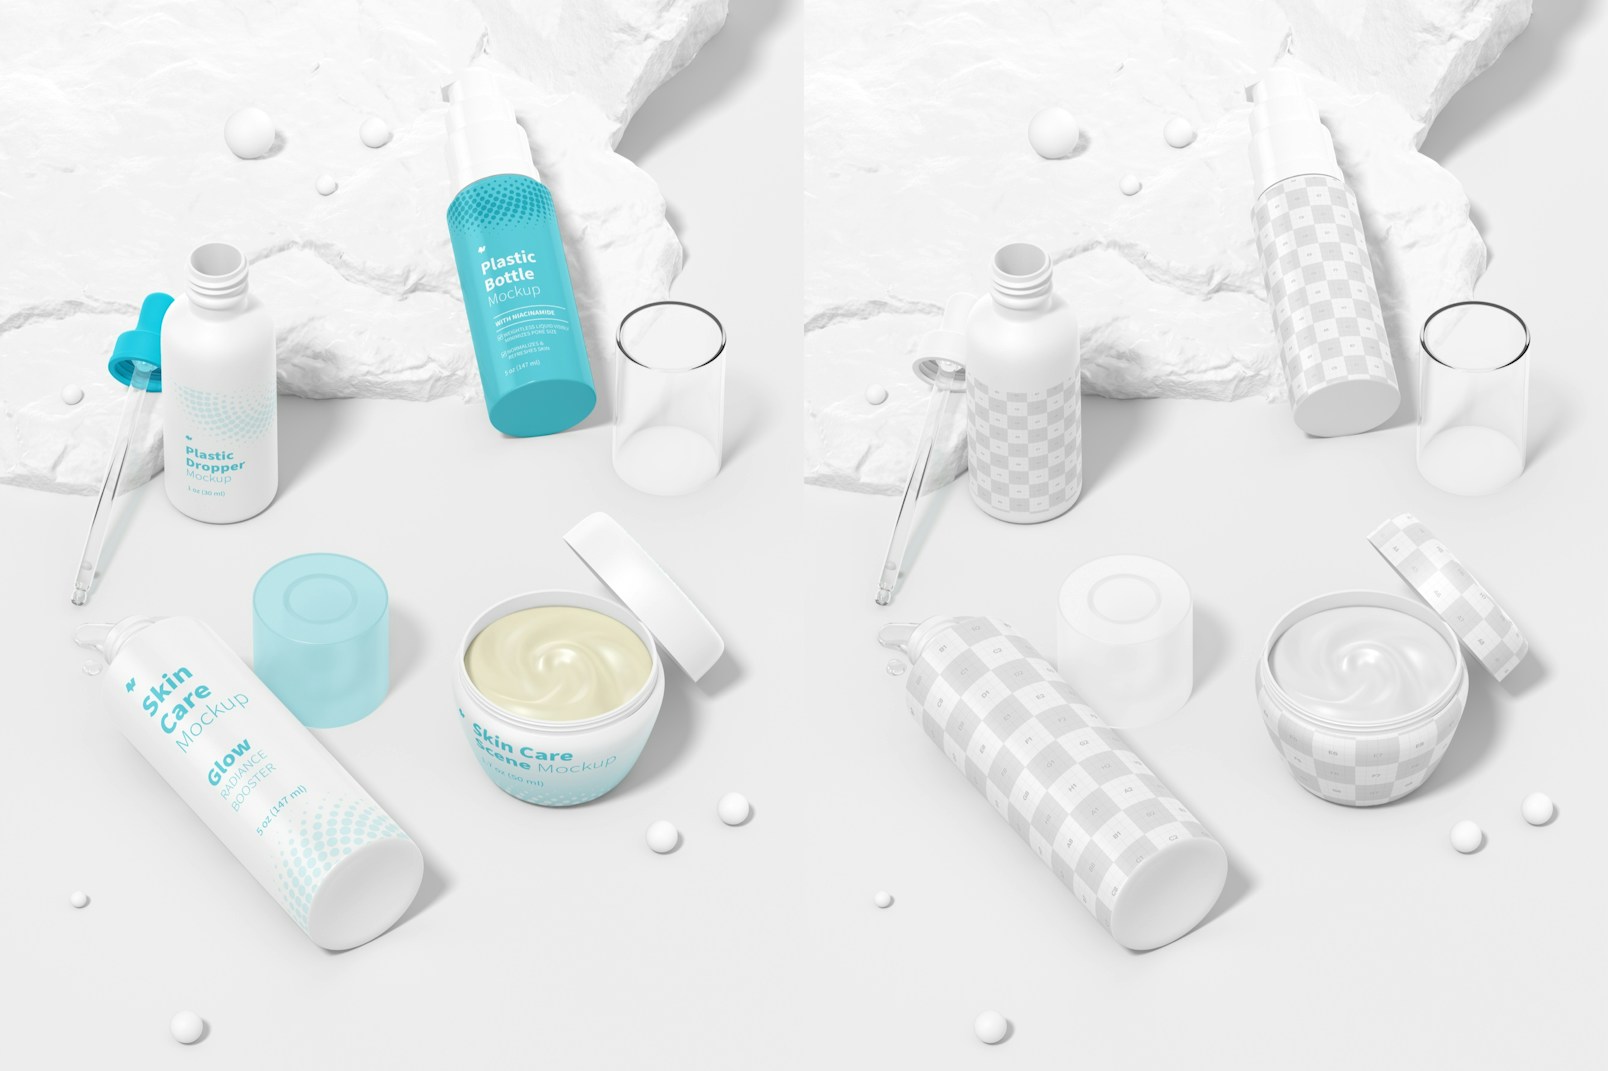 Skin Care Routine Scene Mockup, Standing and Dropped